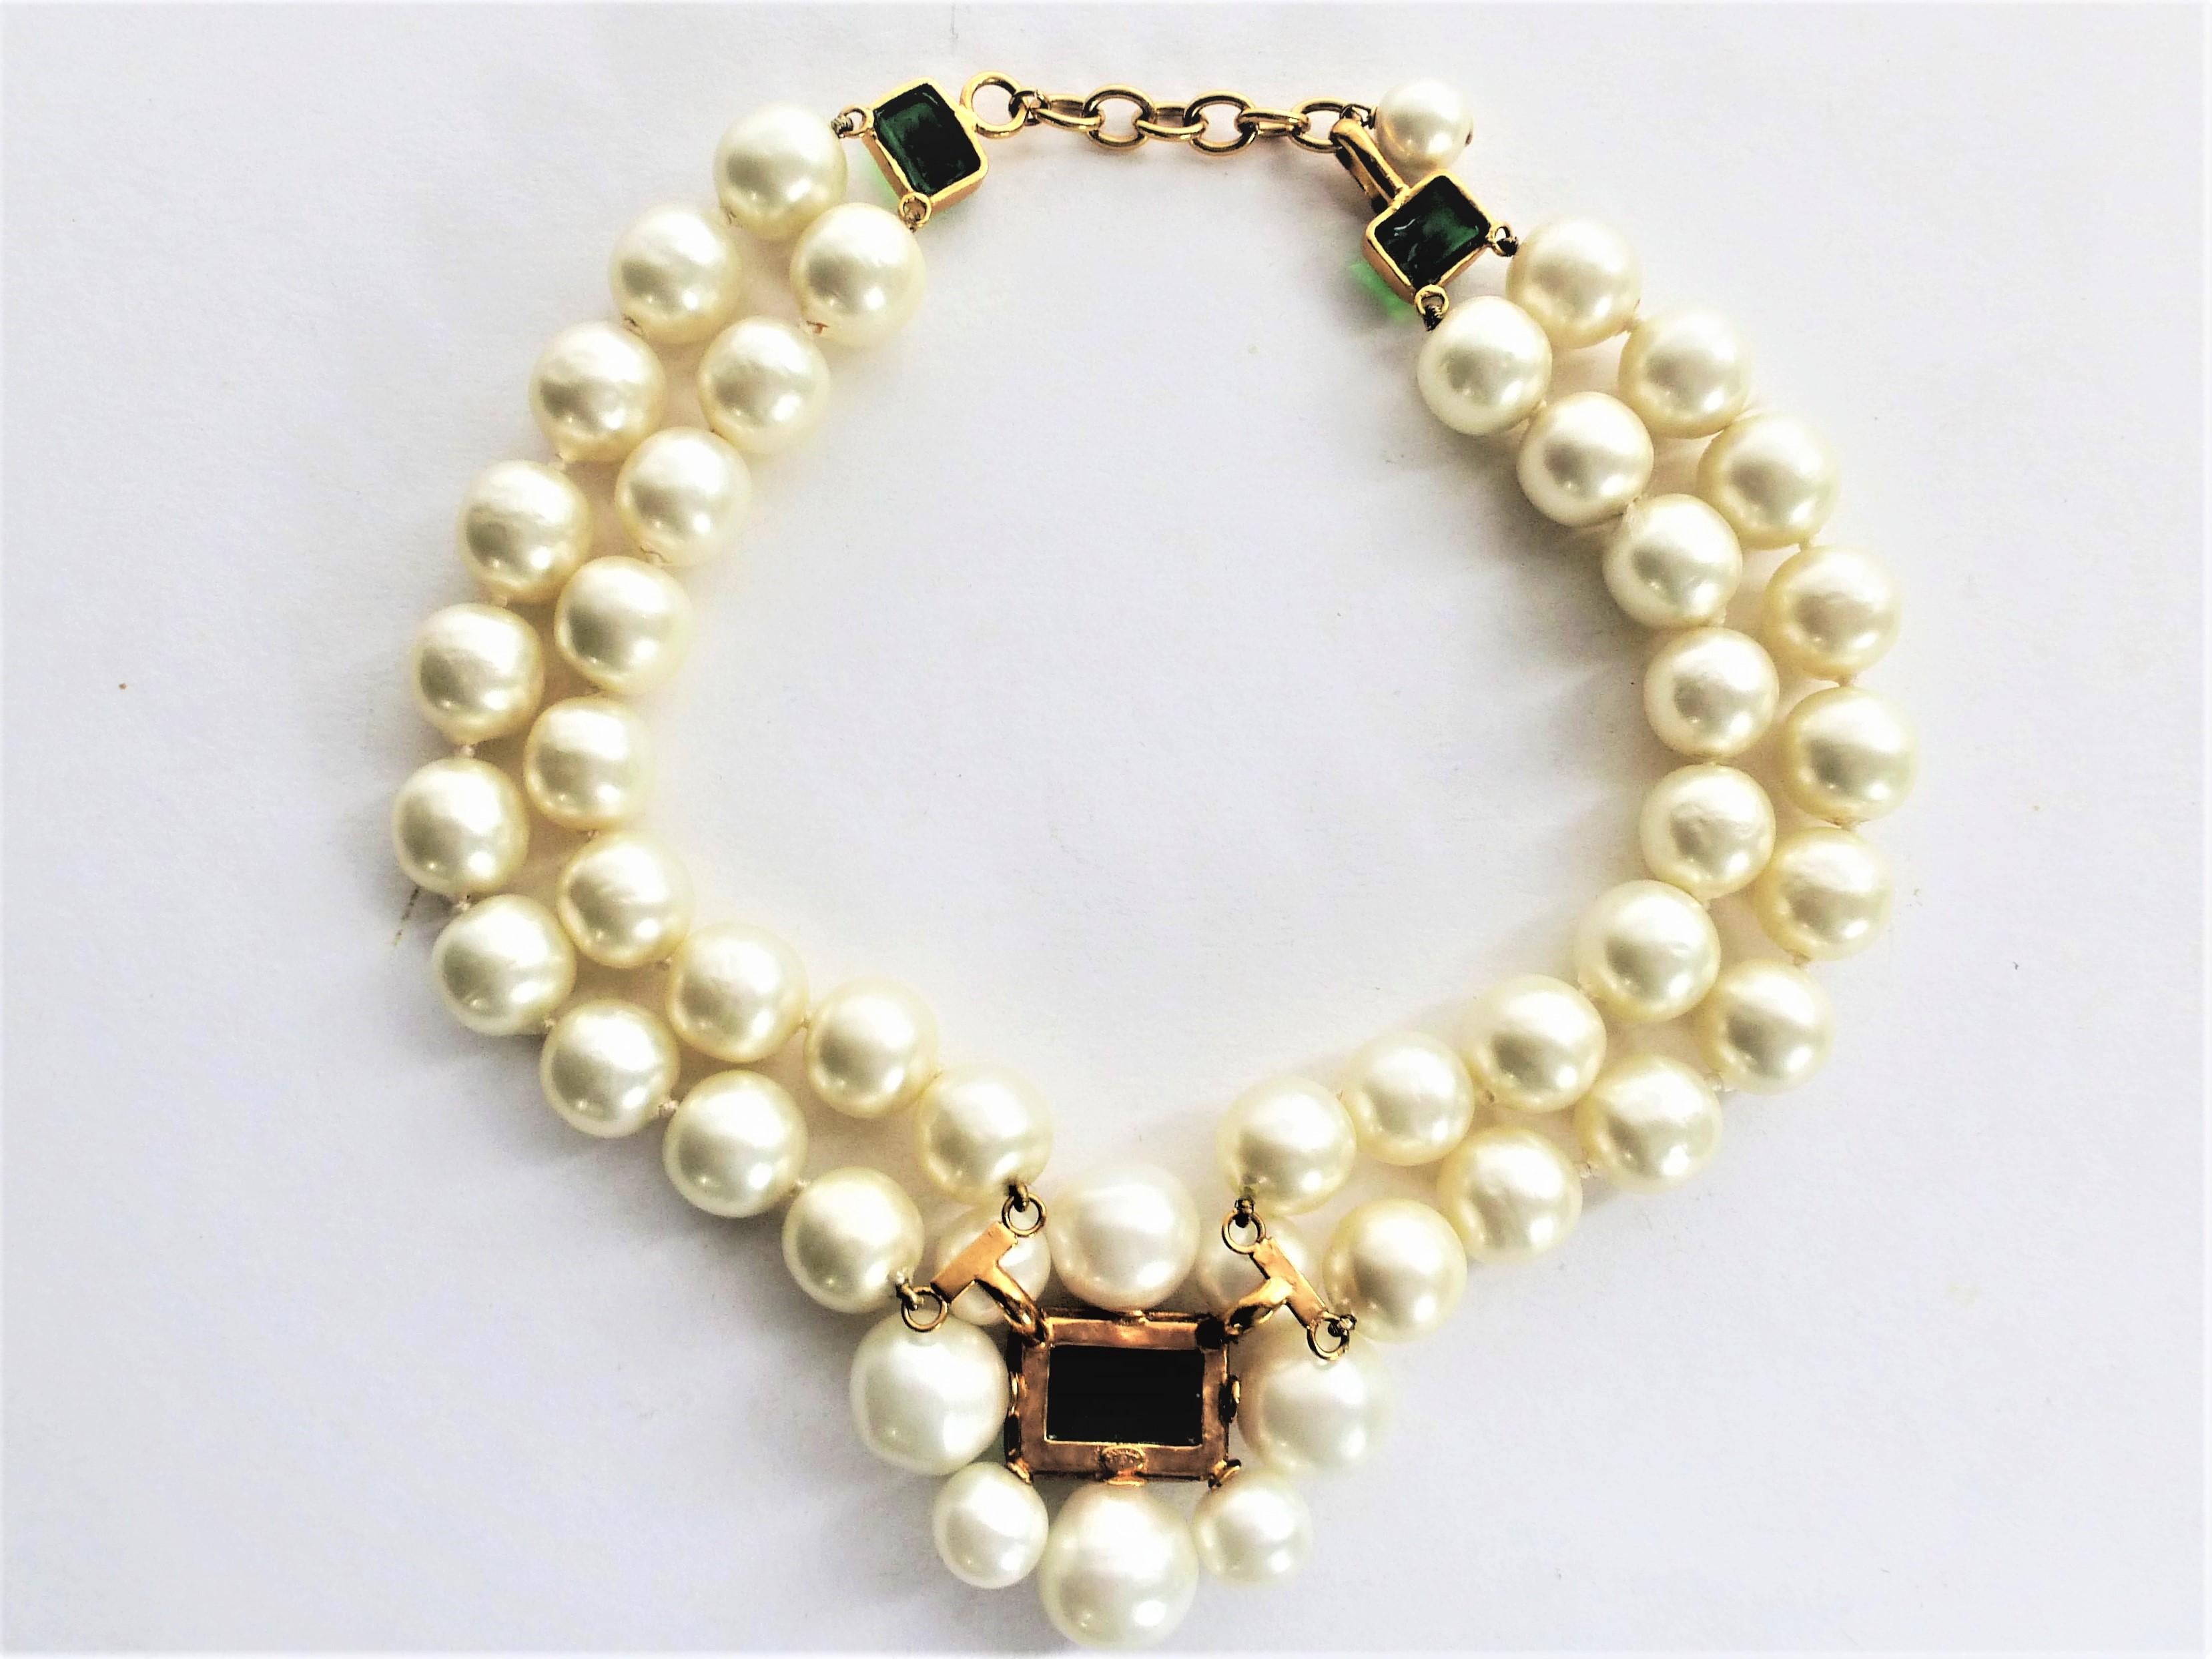 CHANEL collier with pearls and Gripoix signed 97A - 1997 Autumn 1